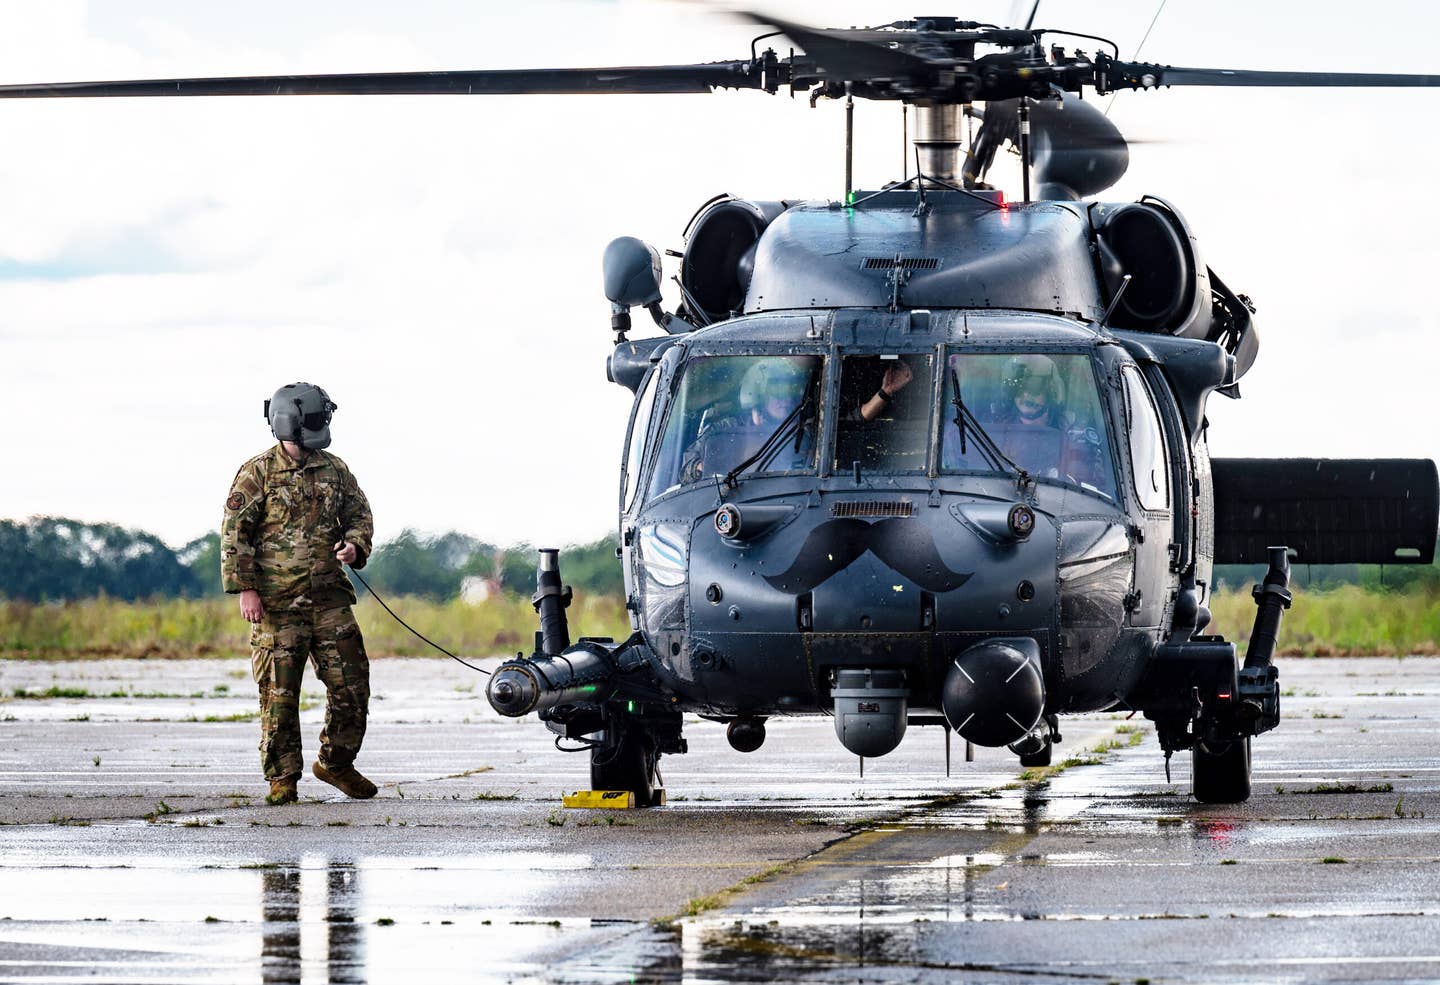 U.S. Air Force Tech Sgt. John Dwinell, 56th Rescue Generation Squadron flying crew chief, shuts down a U.S. Air Force HH-60G Pave Hawk helicopter at Batajnica Air Base, Serbia, Aug. 7, 2023. <em>U.S. Air Force photo by Airman 1st Class Edgar Grimaldo</em>